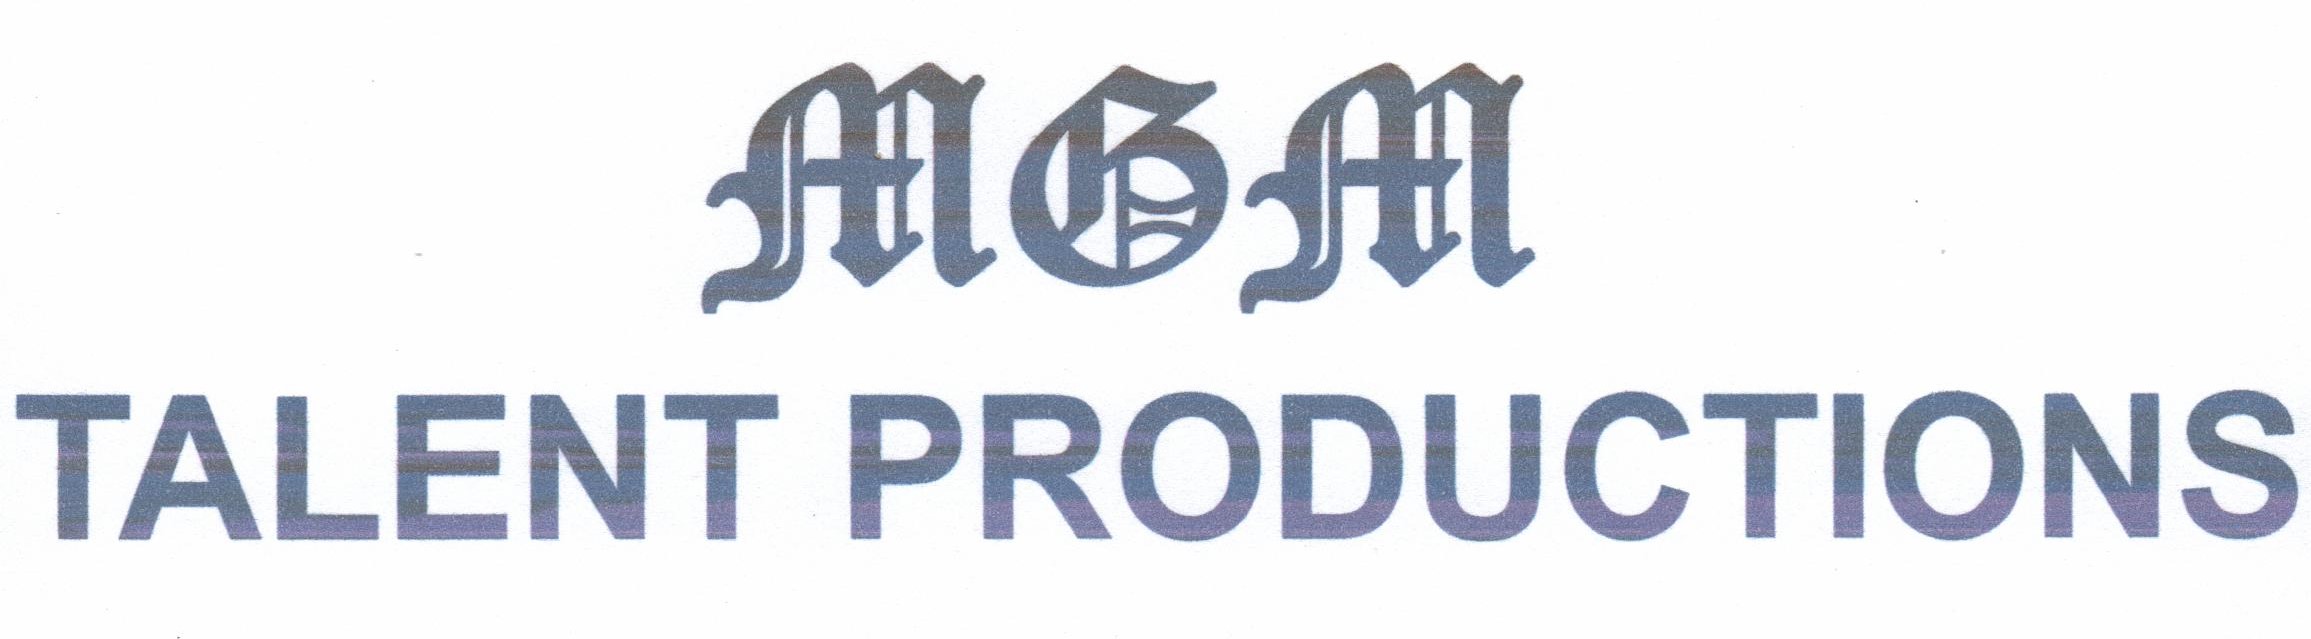 MGM Talent Productions